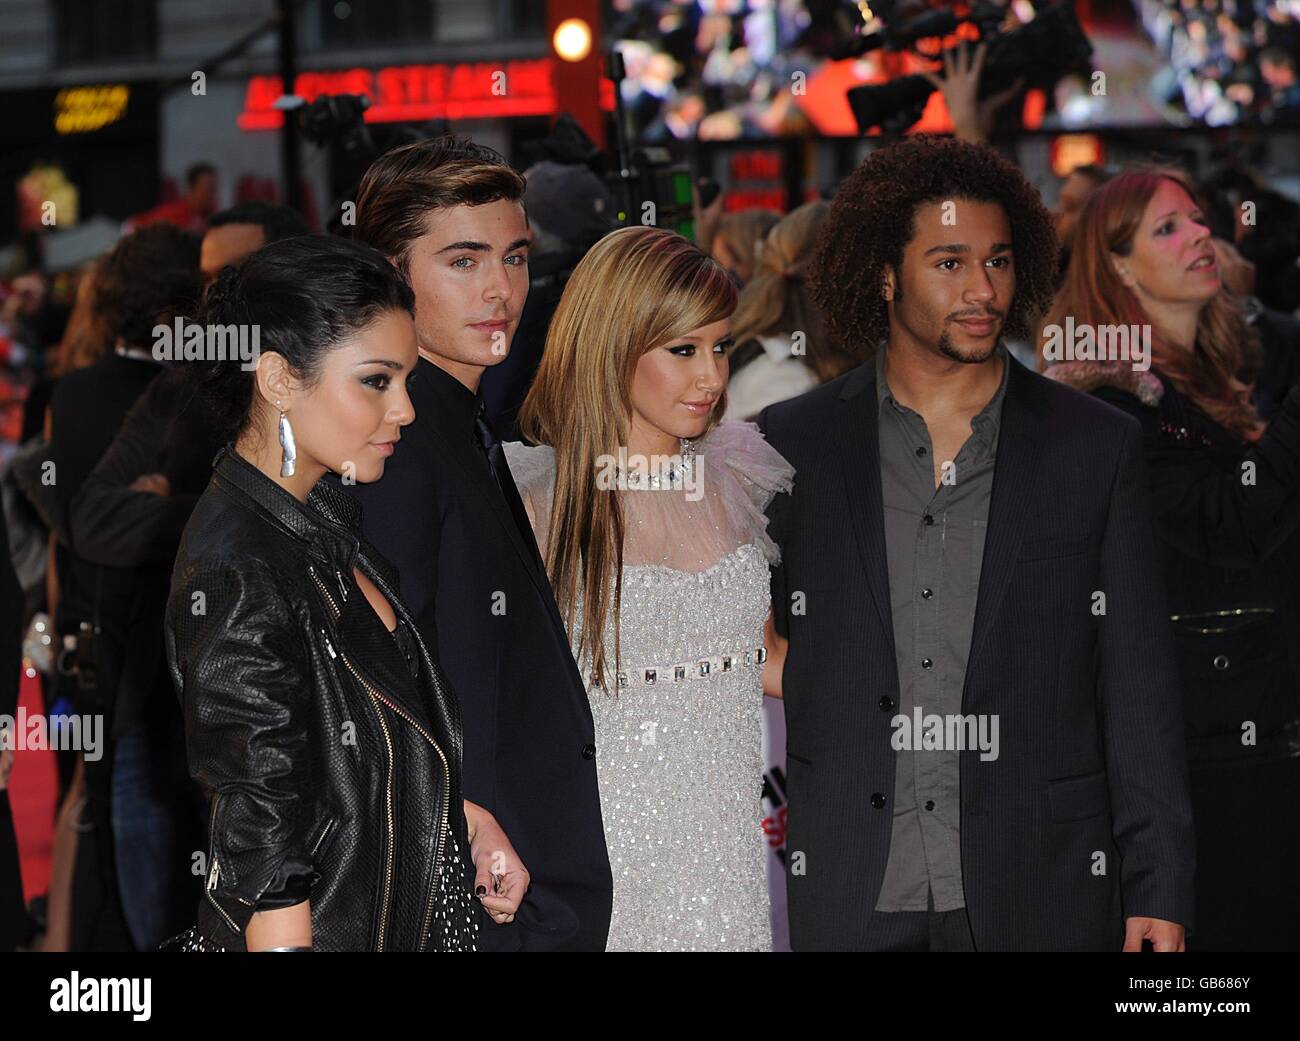 Vanessa Hudgens, Zac Efron, Ashley Tisdale and Corbin Blue arrive for the UK premiere of 'High School Musical 3' at the Empire Leicester Square, London, WC2 Stock Photo